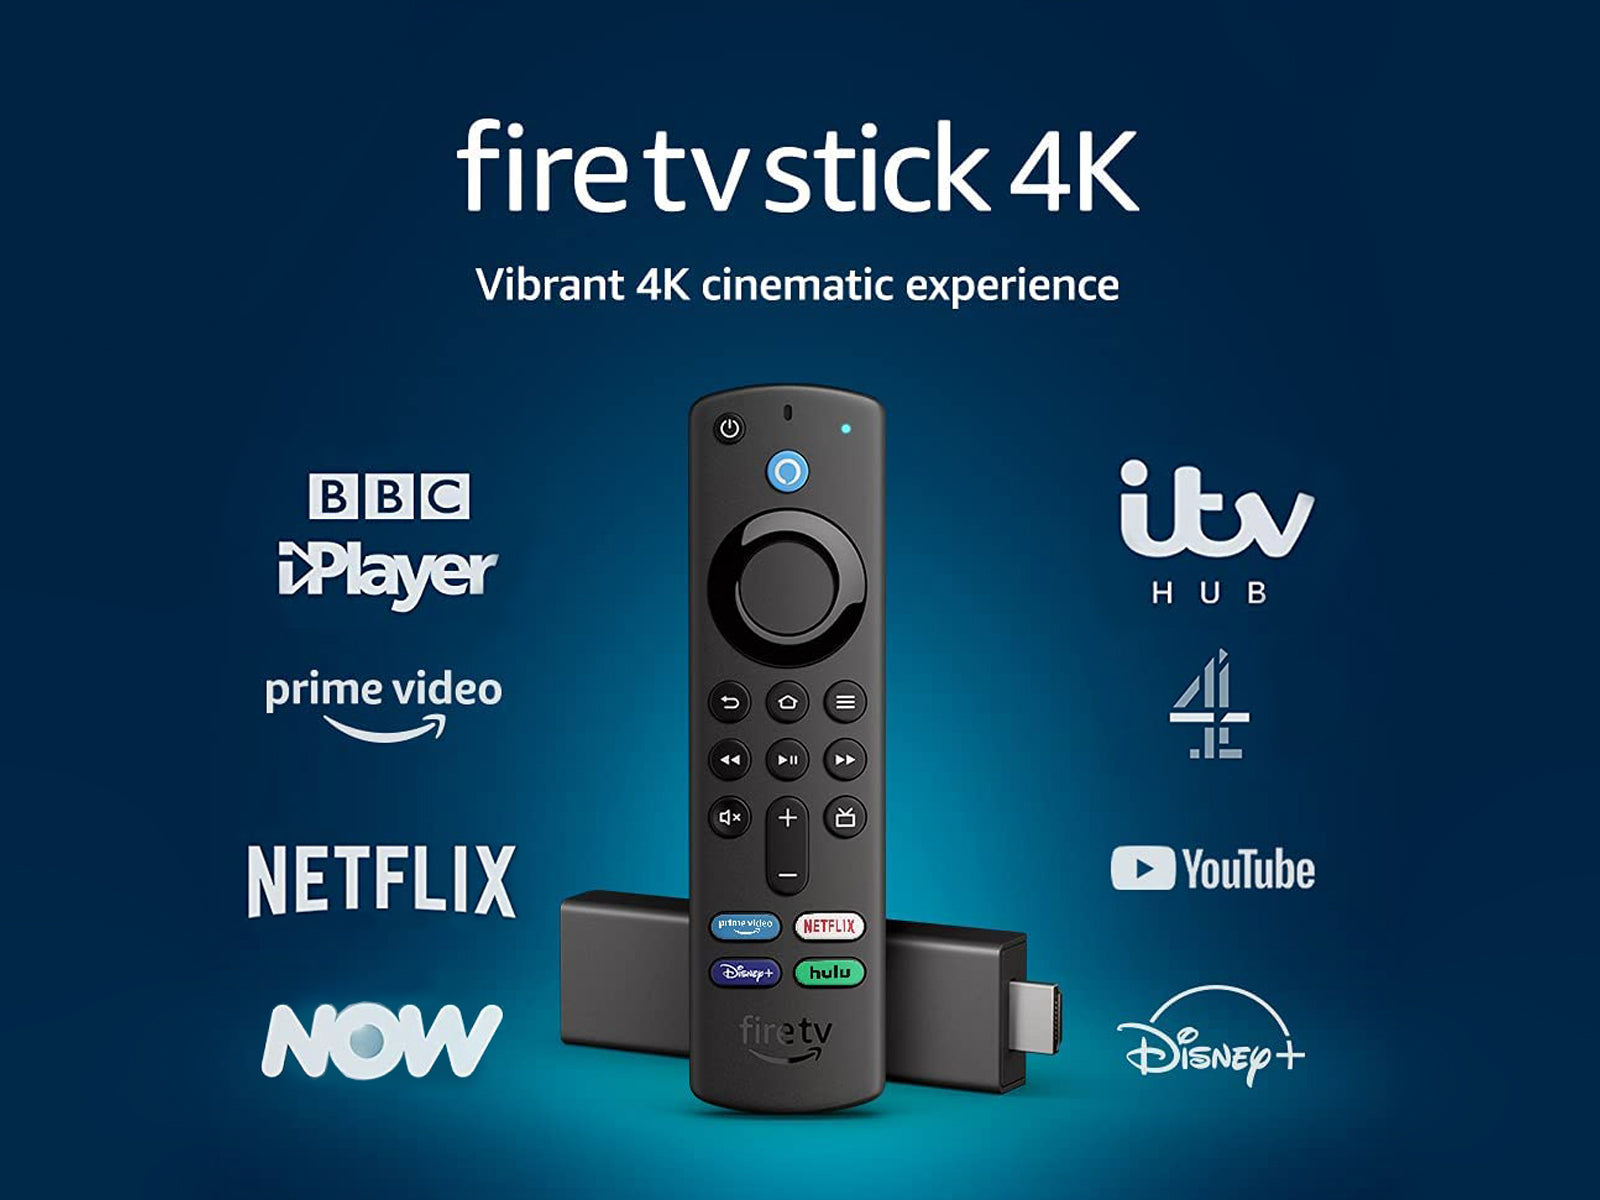 Amazon Fire TV Stick Showing Information About The Product 